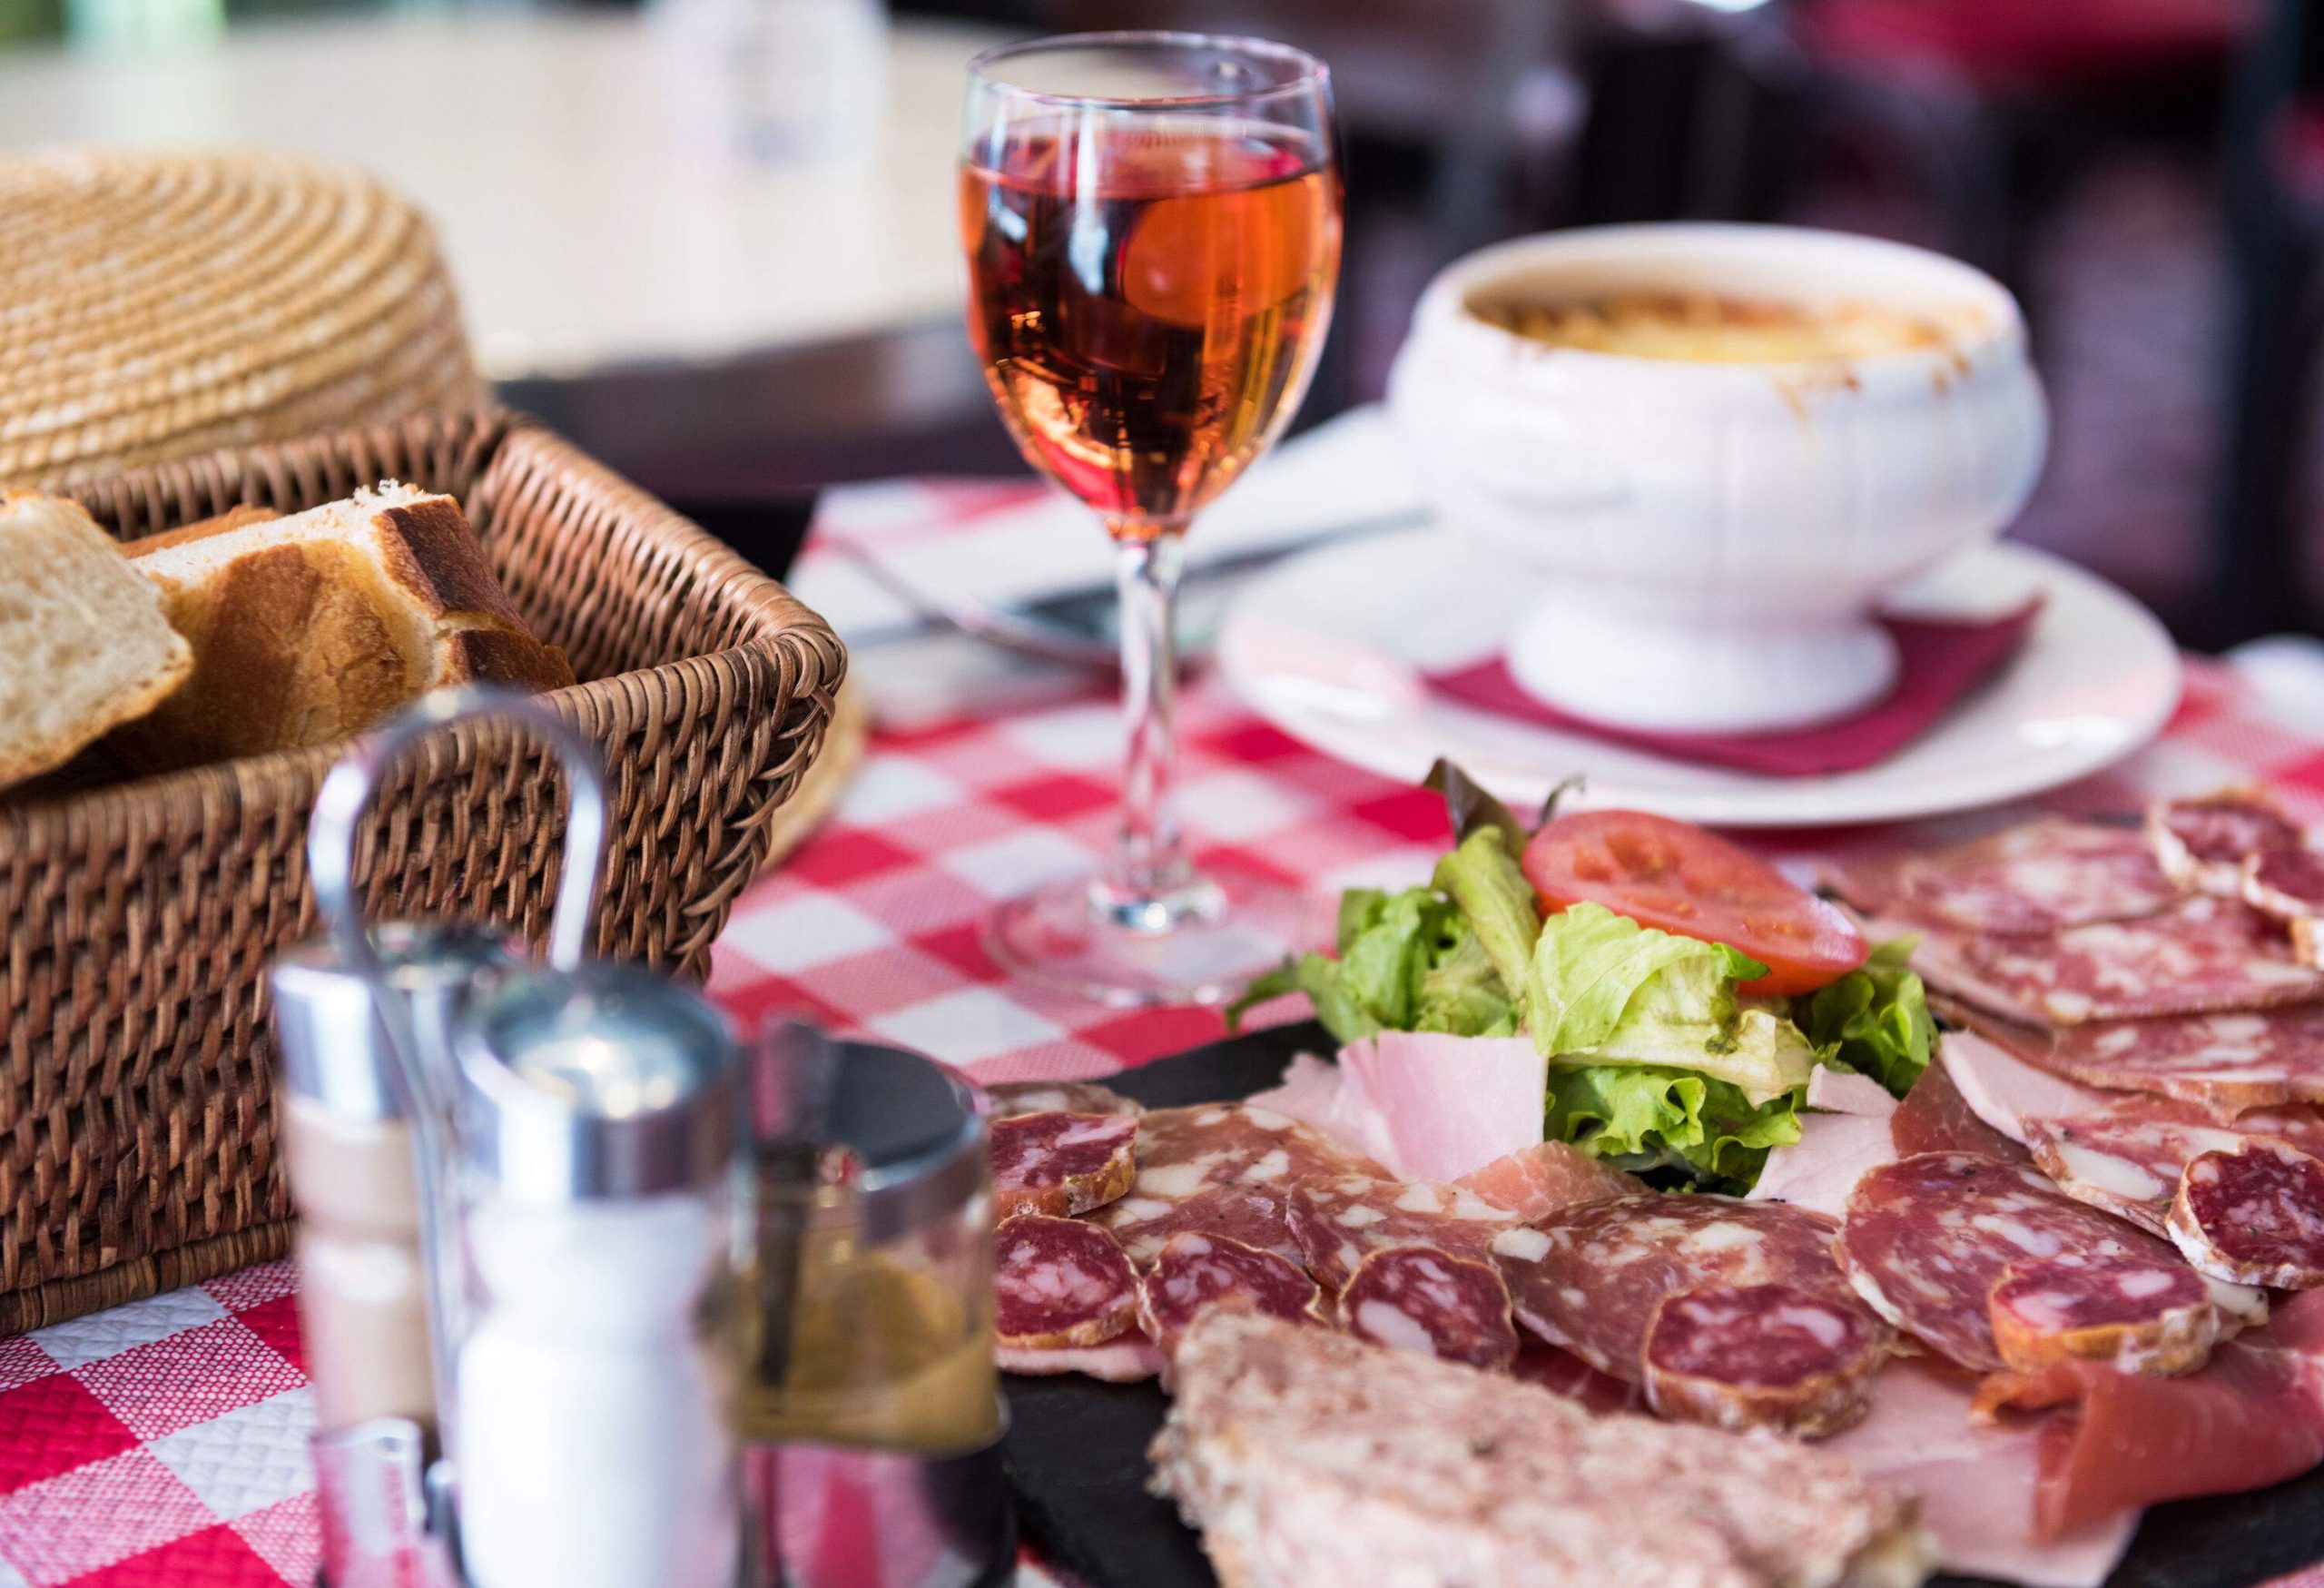 On a table covered with a checkered cloth were placed cured meat, wine in a glass, bread, and soup.